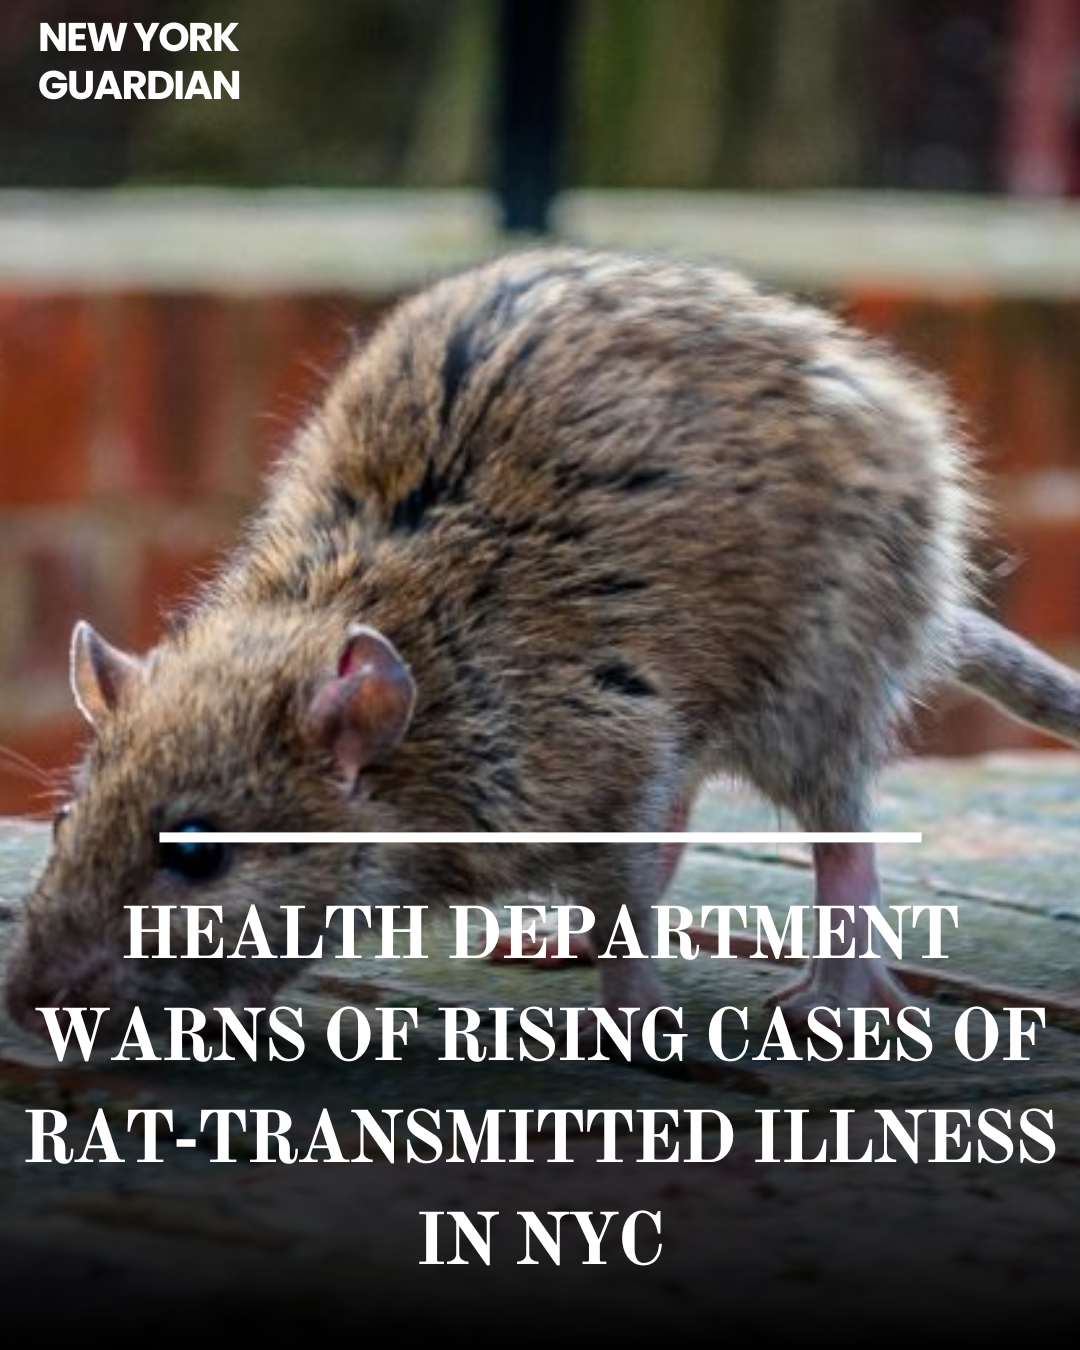 The NYC Department of Health is warning of an upsurge in a potentially fatal bacterial infection transmitted by rats.